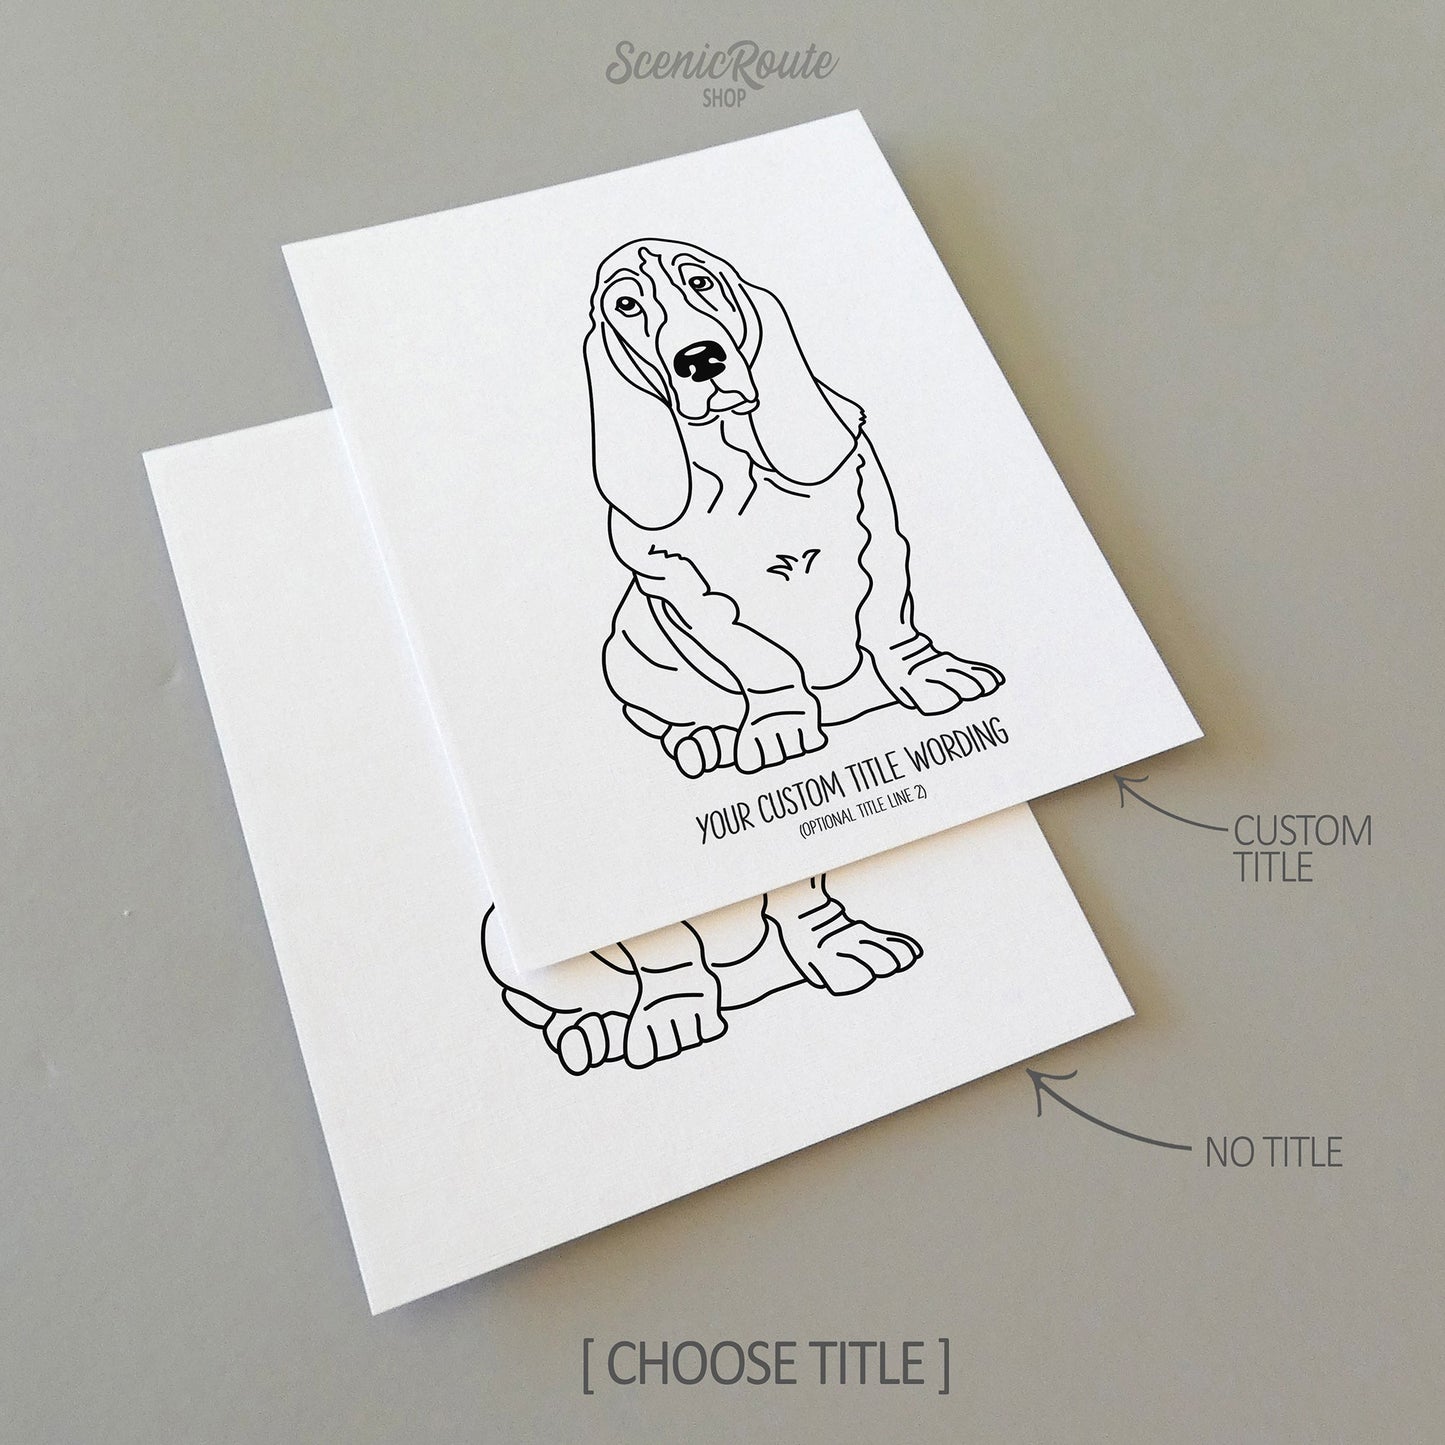 Two drawings of a Basset Hound dog on white linen paper with a gray background.  Pieces are shown with “No Title” and “Custom Title” options to illustrate the available art print options.